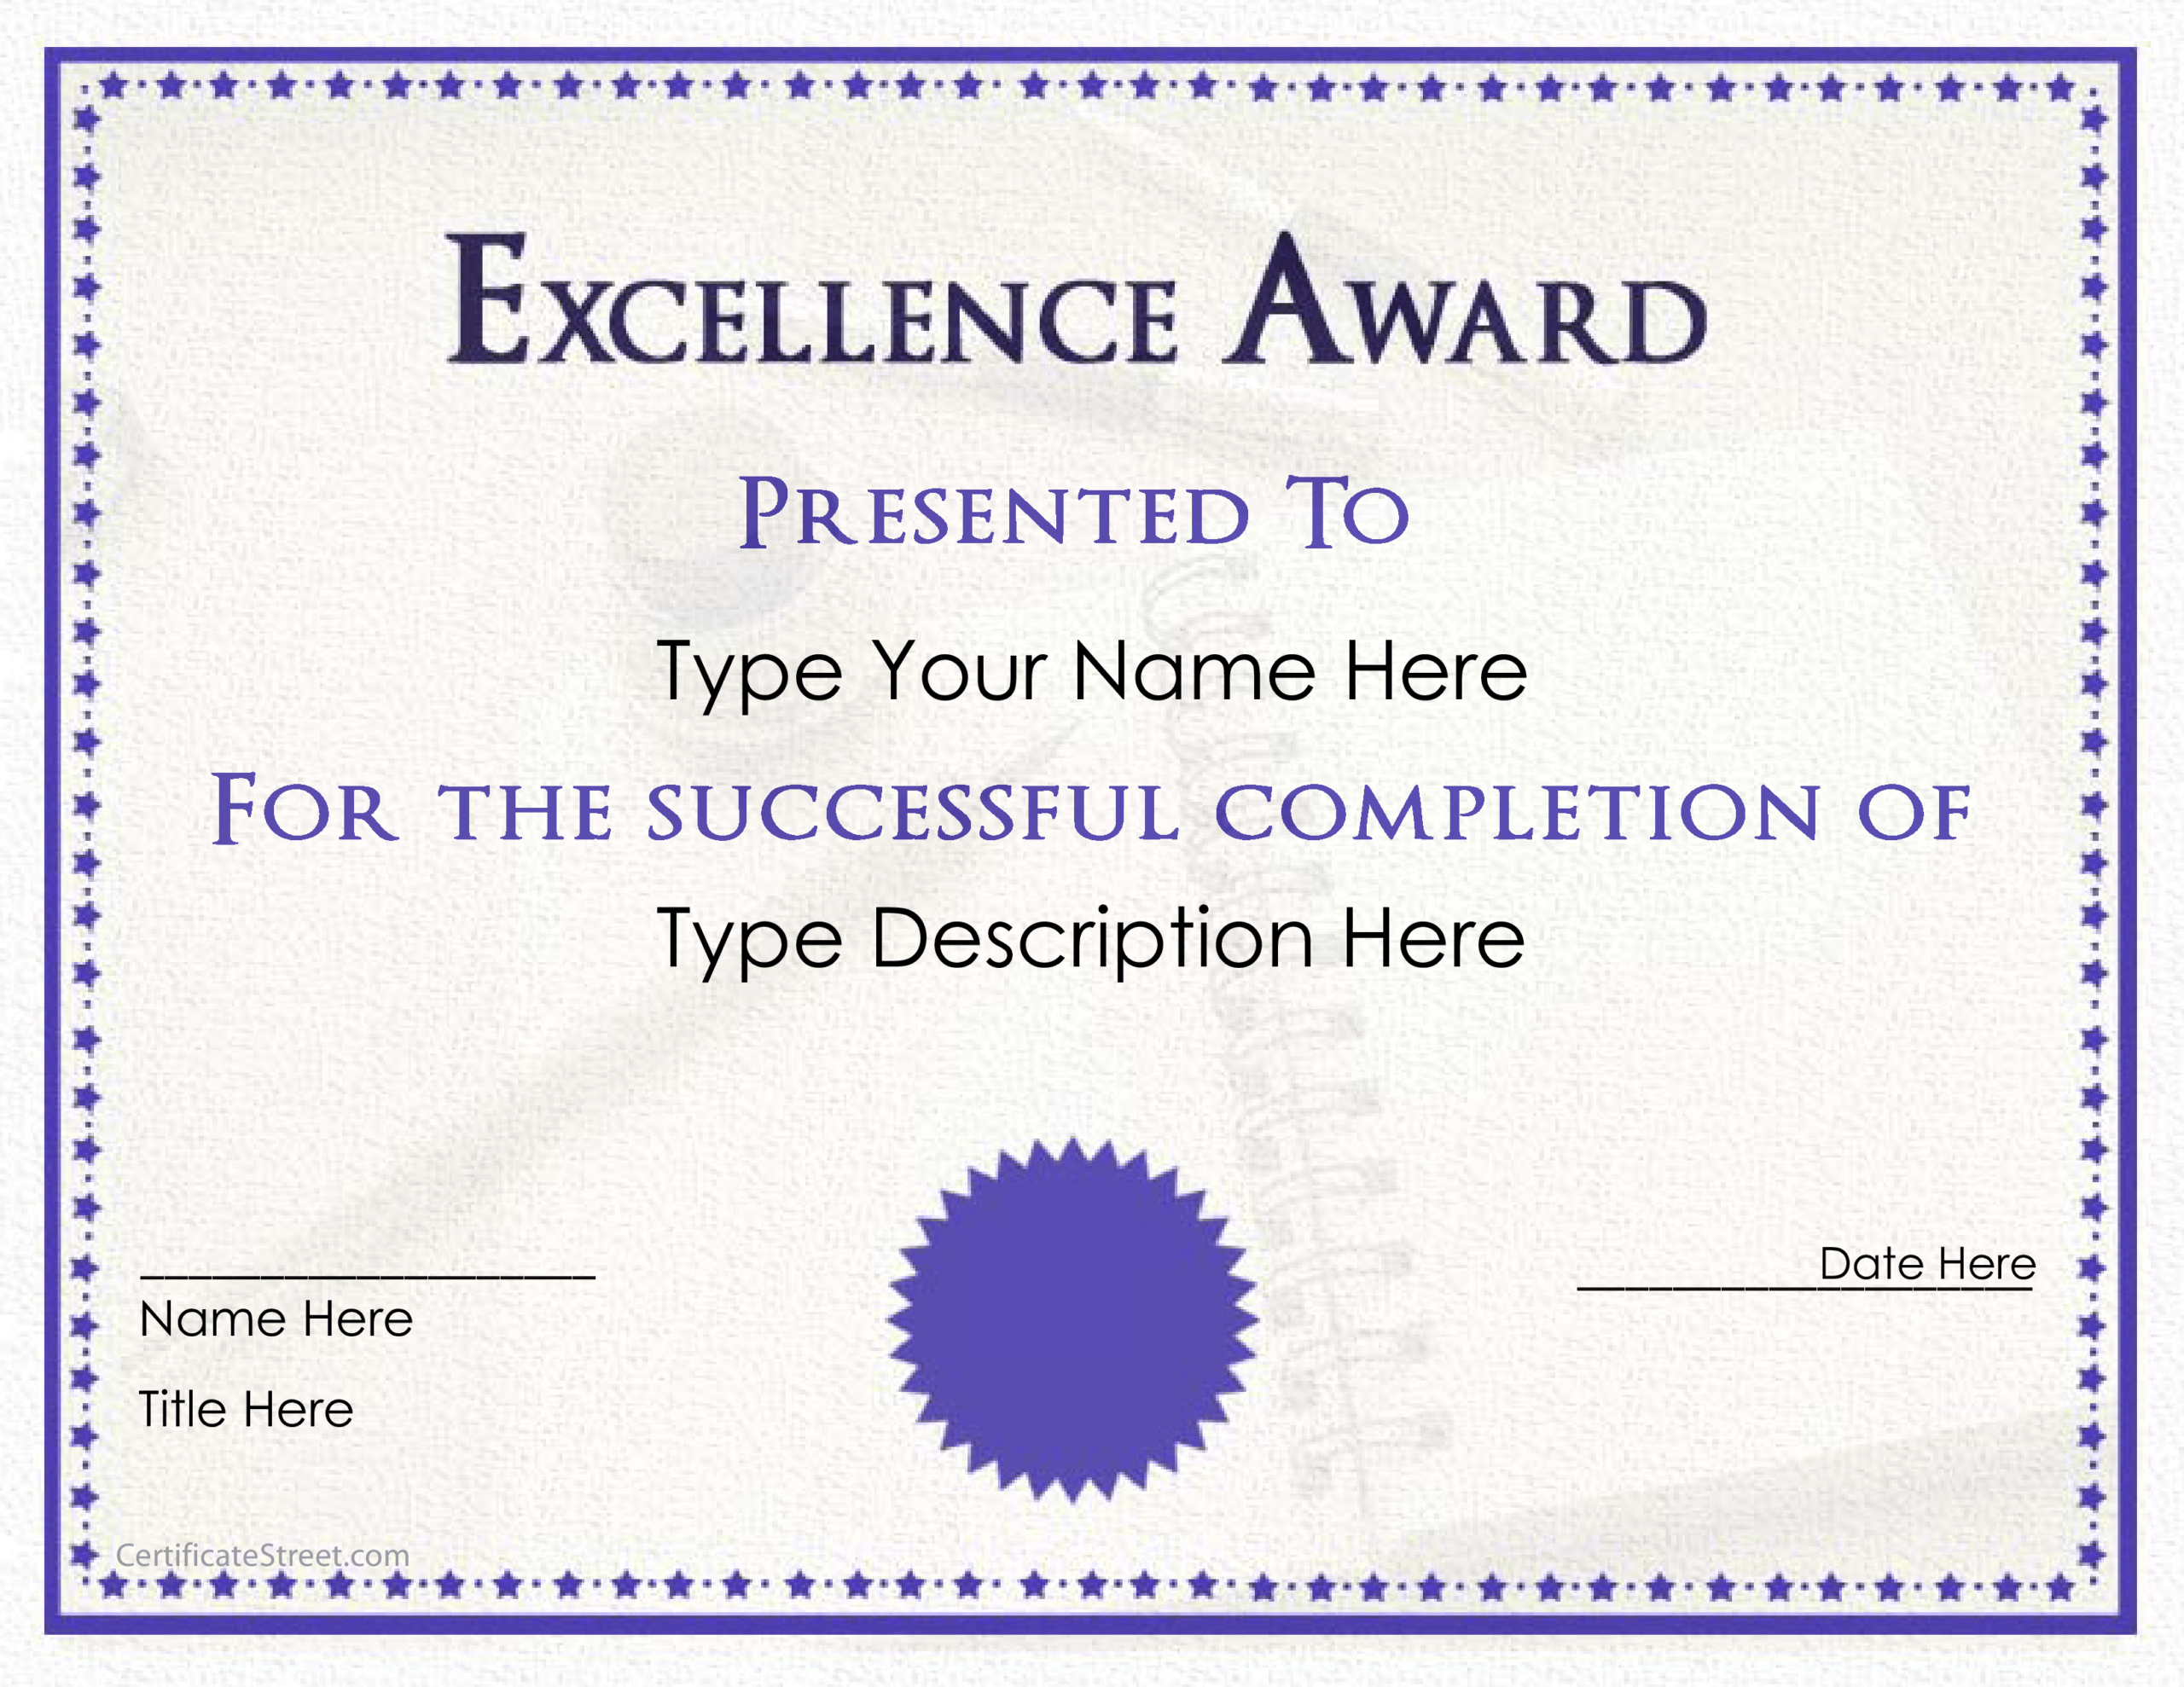 Excellence Award Certificate | Templates At With Life Saving Award Certificate Template